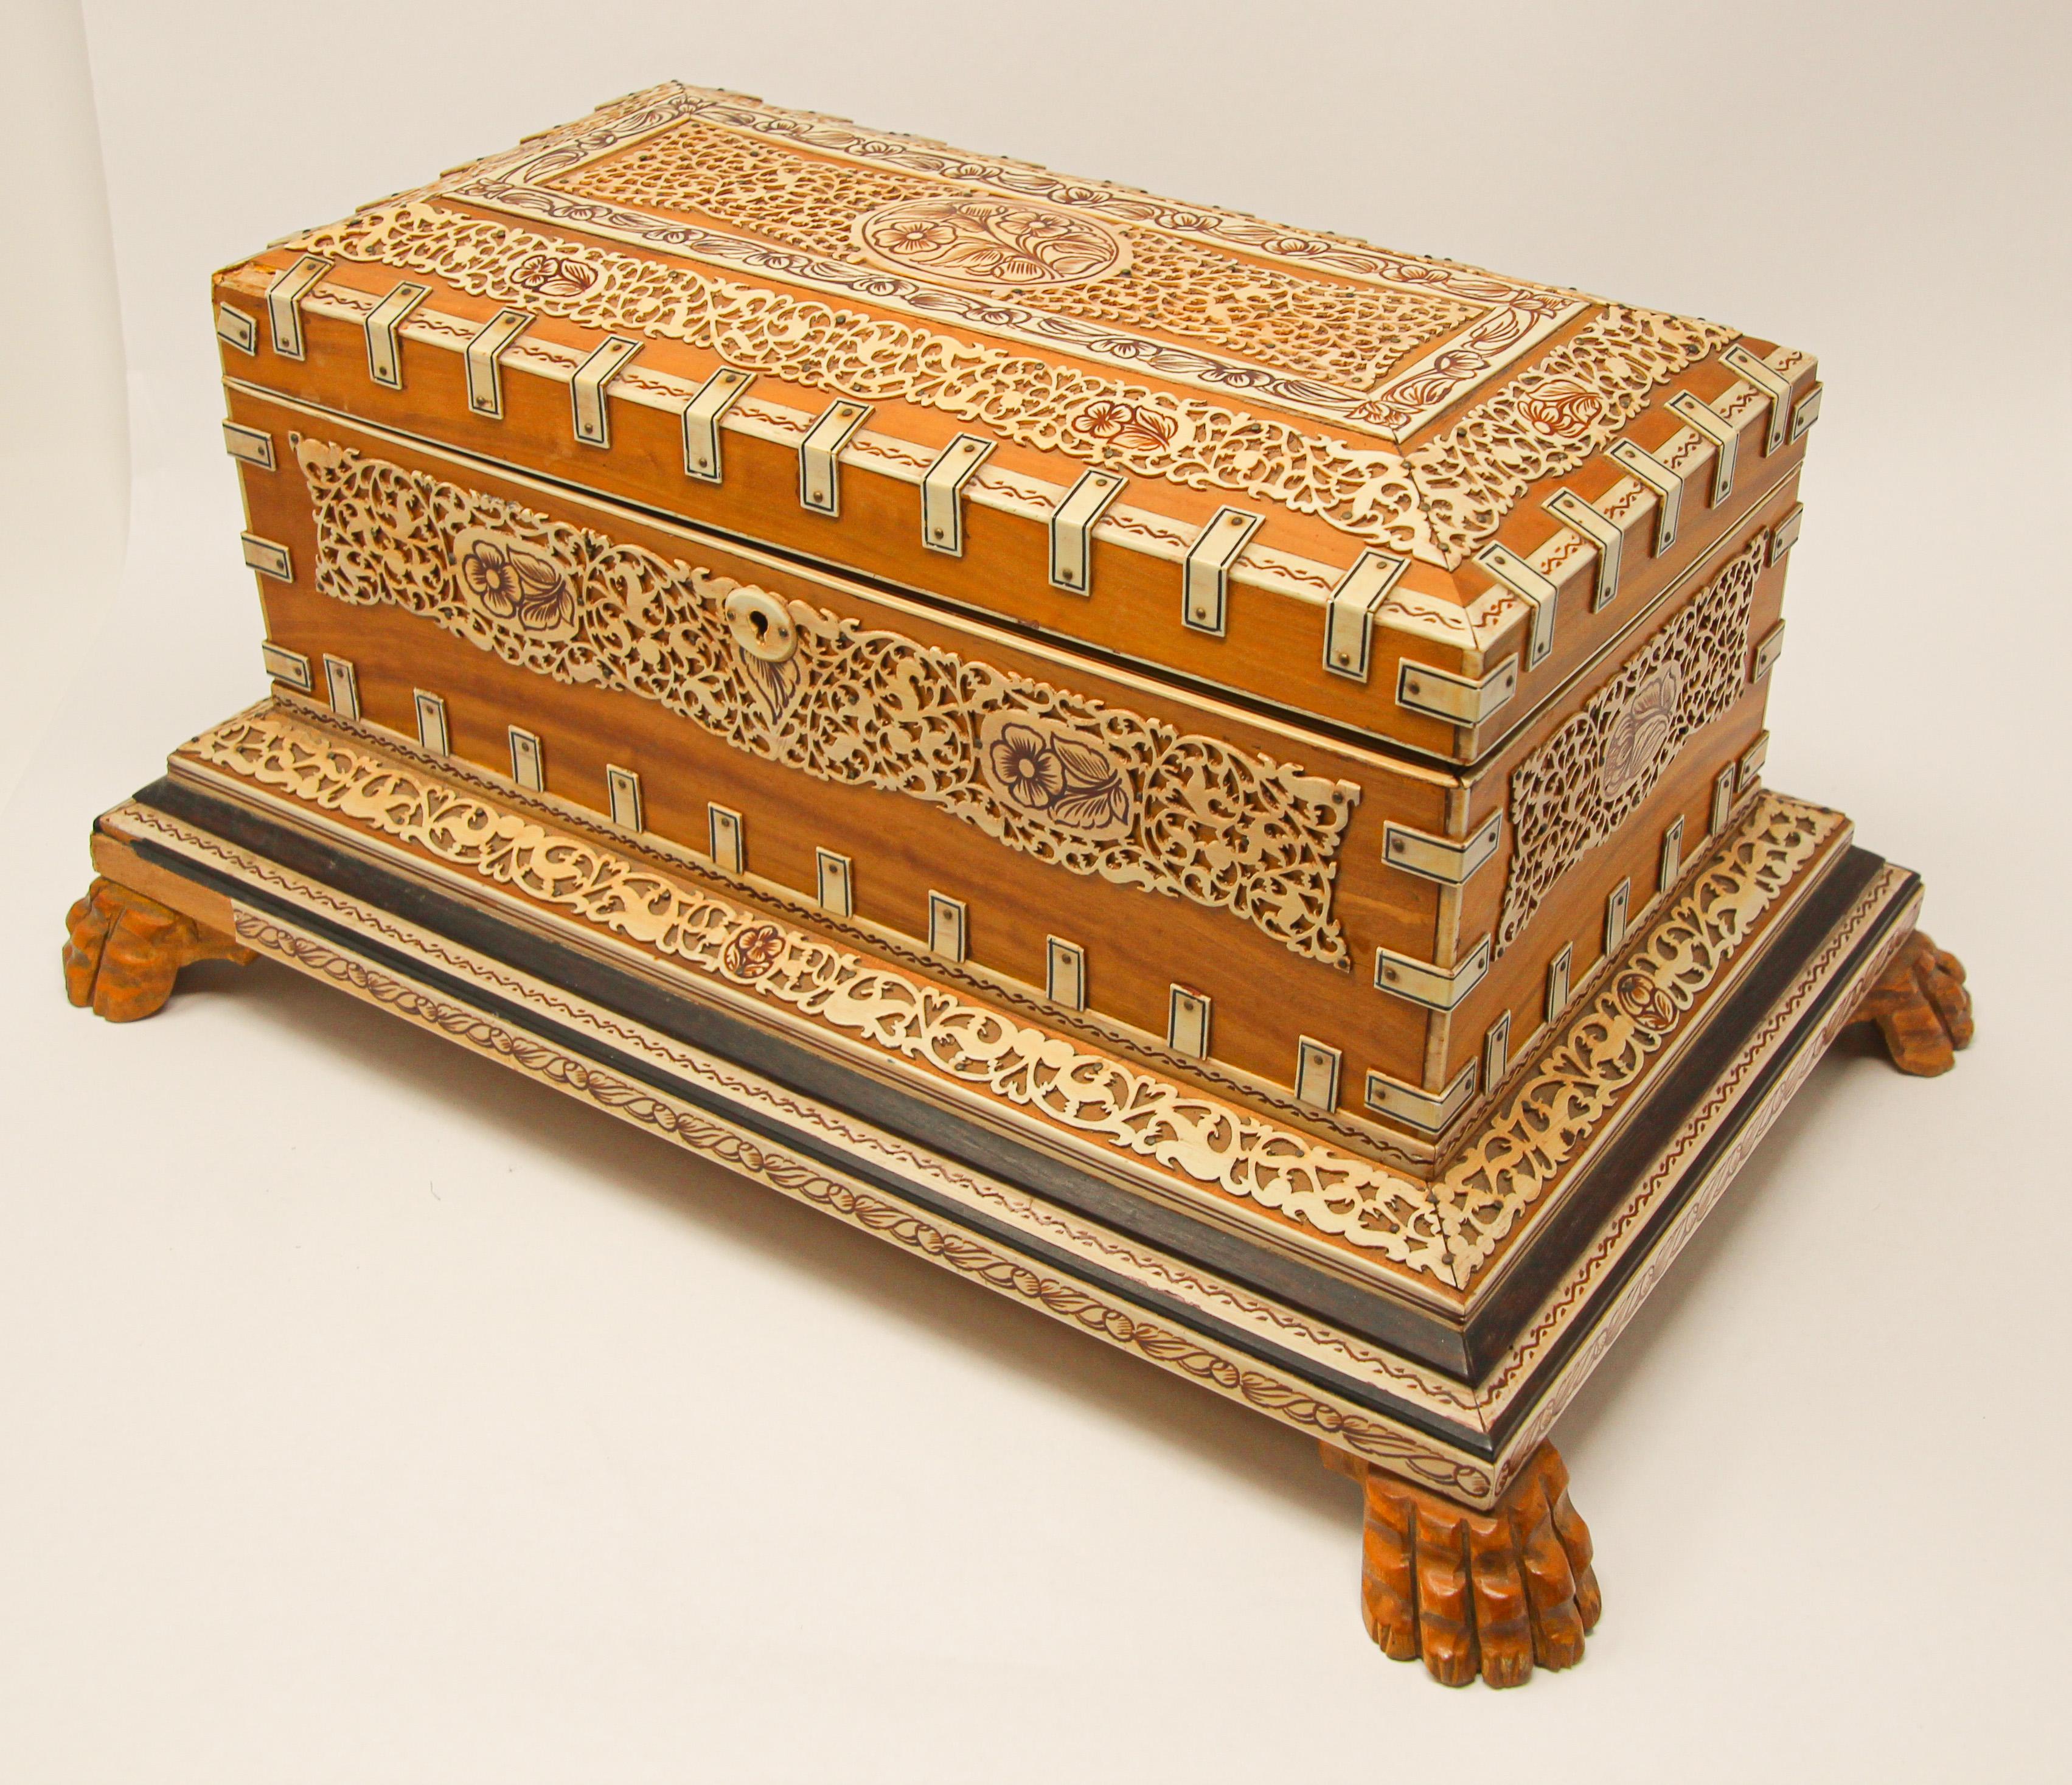 Fine Mughal Style Jewelry decorative box with filigree carving.
Anglo-Indian footed box with exceptional engraved details throughout with filigree and carved veneered and engraved plaques with arabesque carving.
Vizagapatam style.
Handmade in